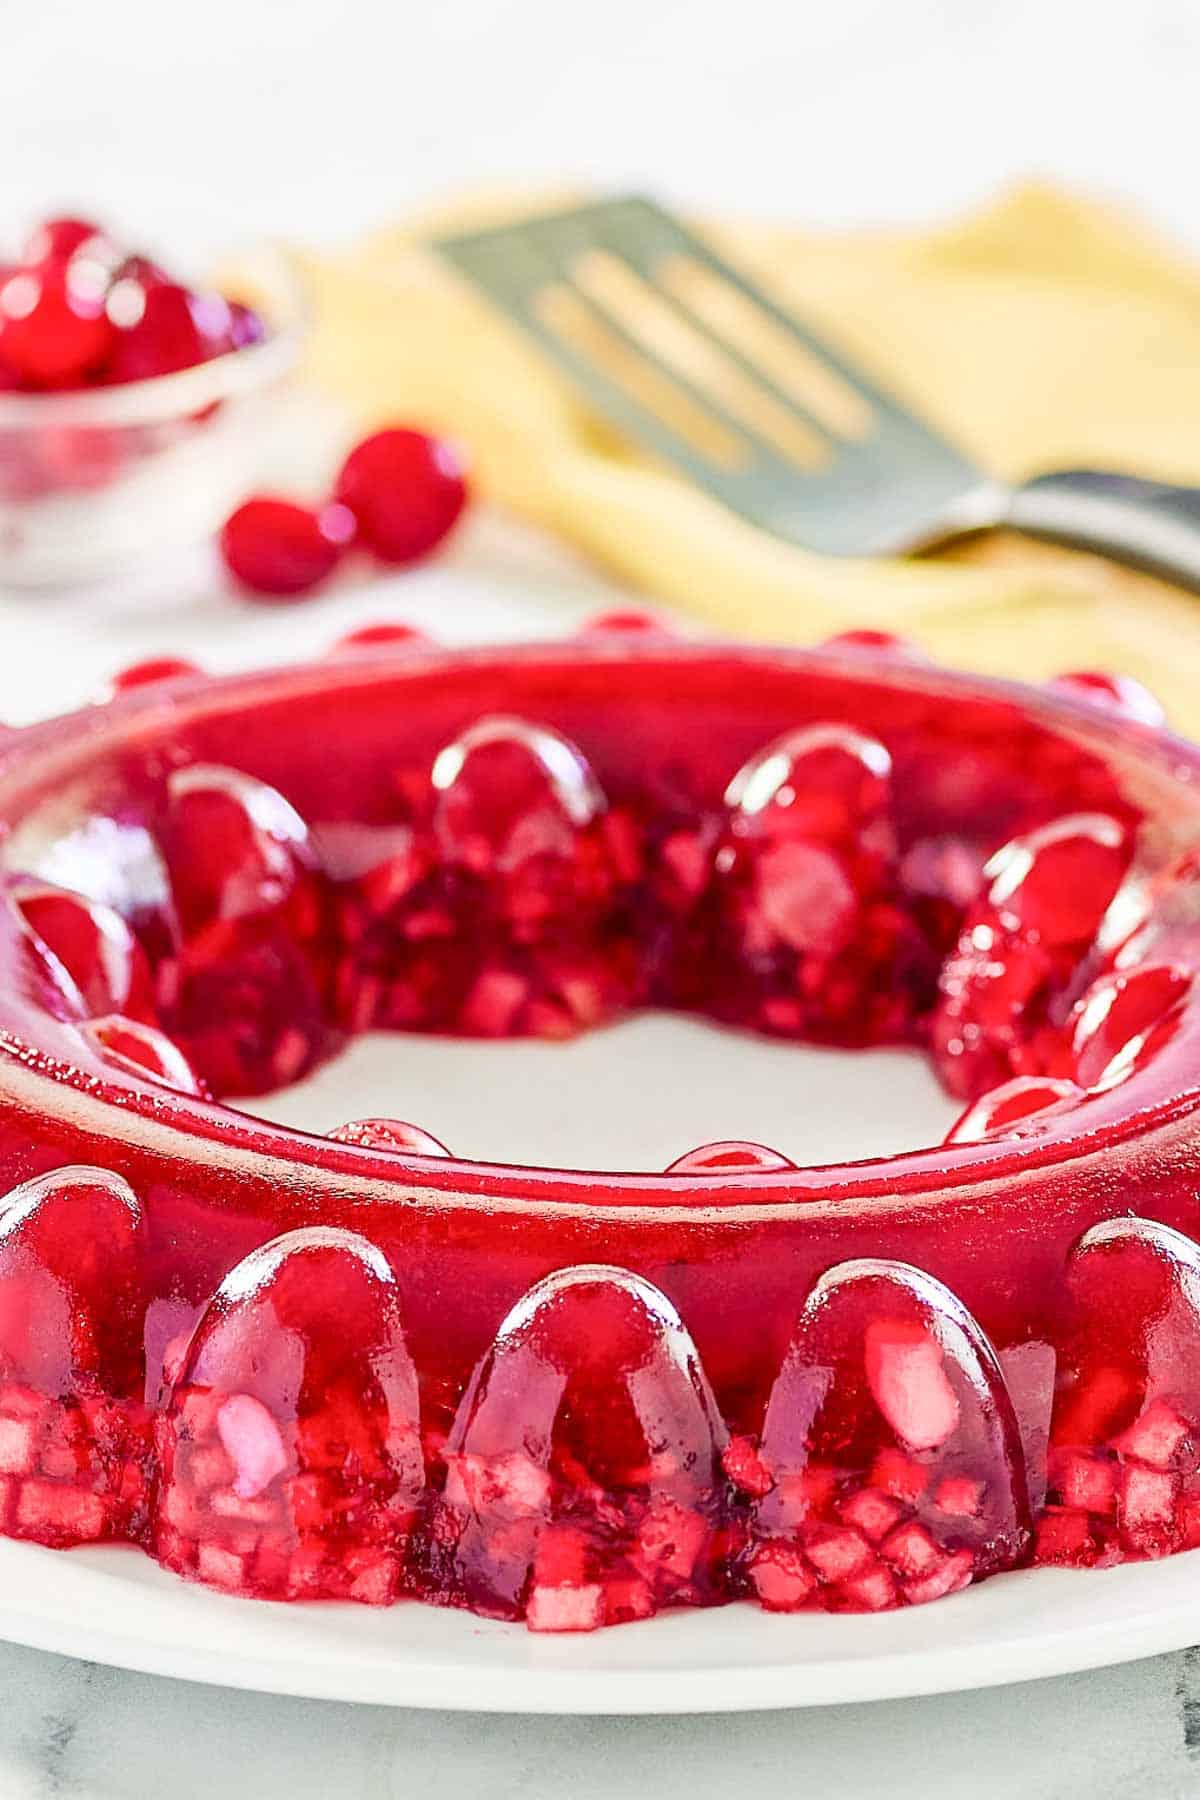 Cranberry jello salad with apples, celery, and nuts on a large round platter.